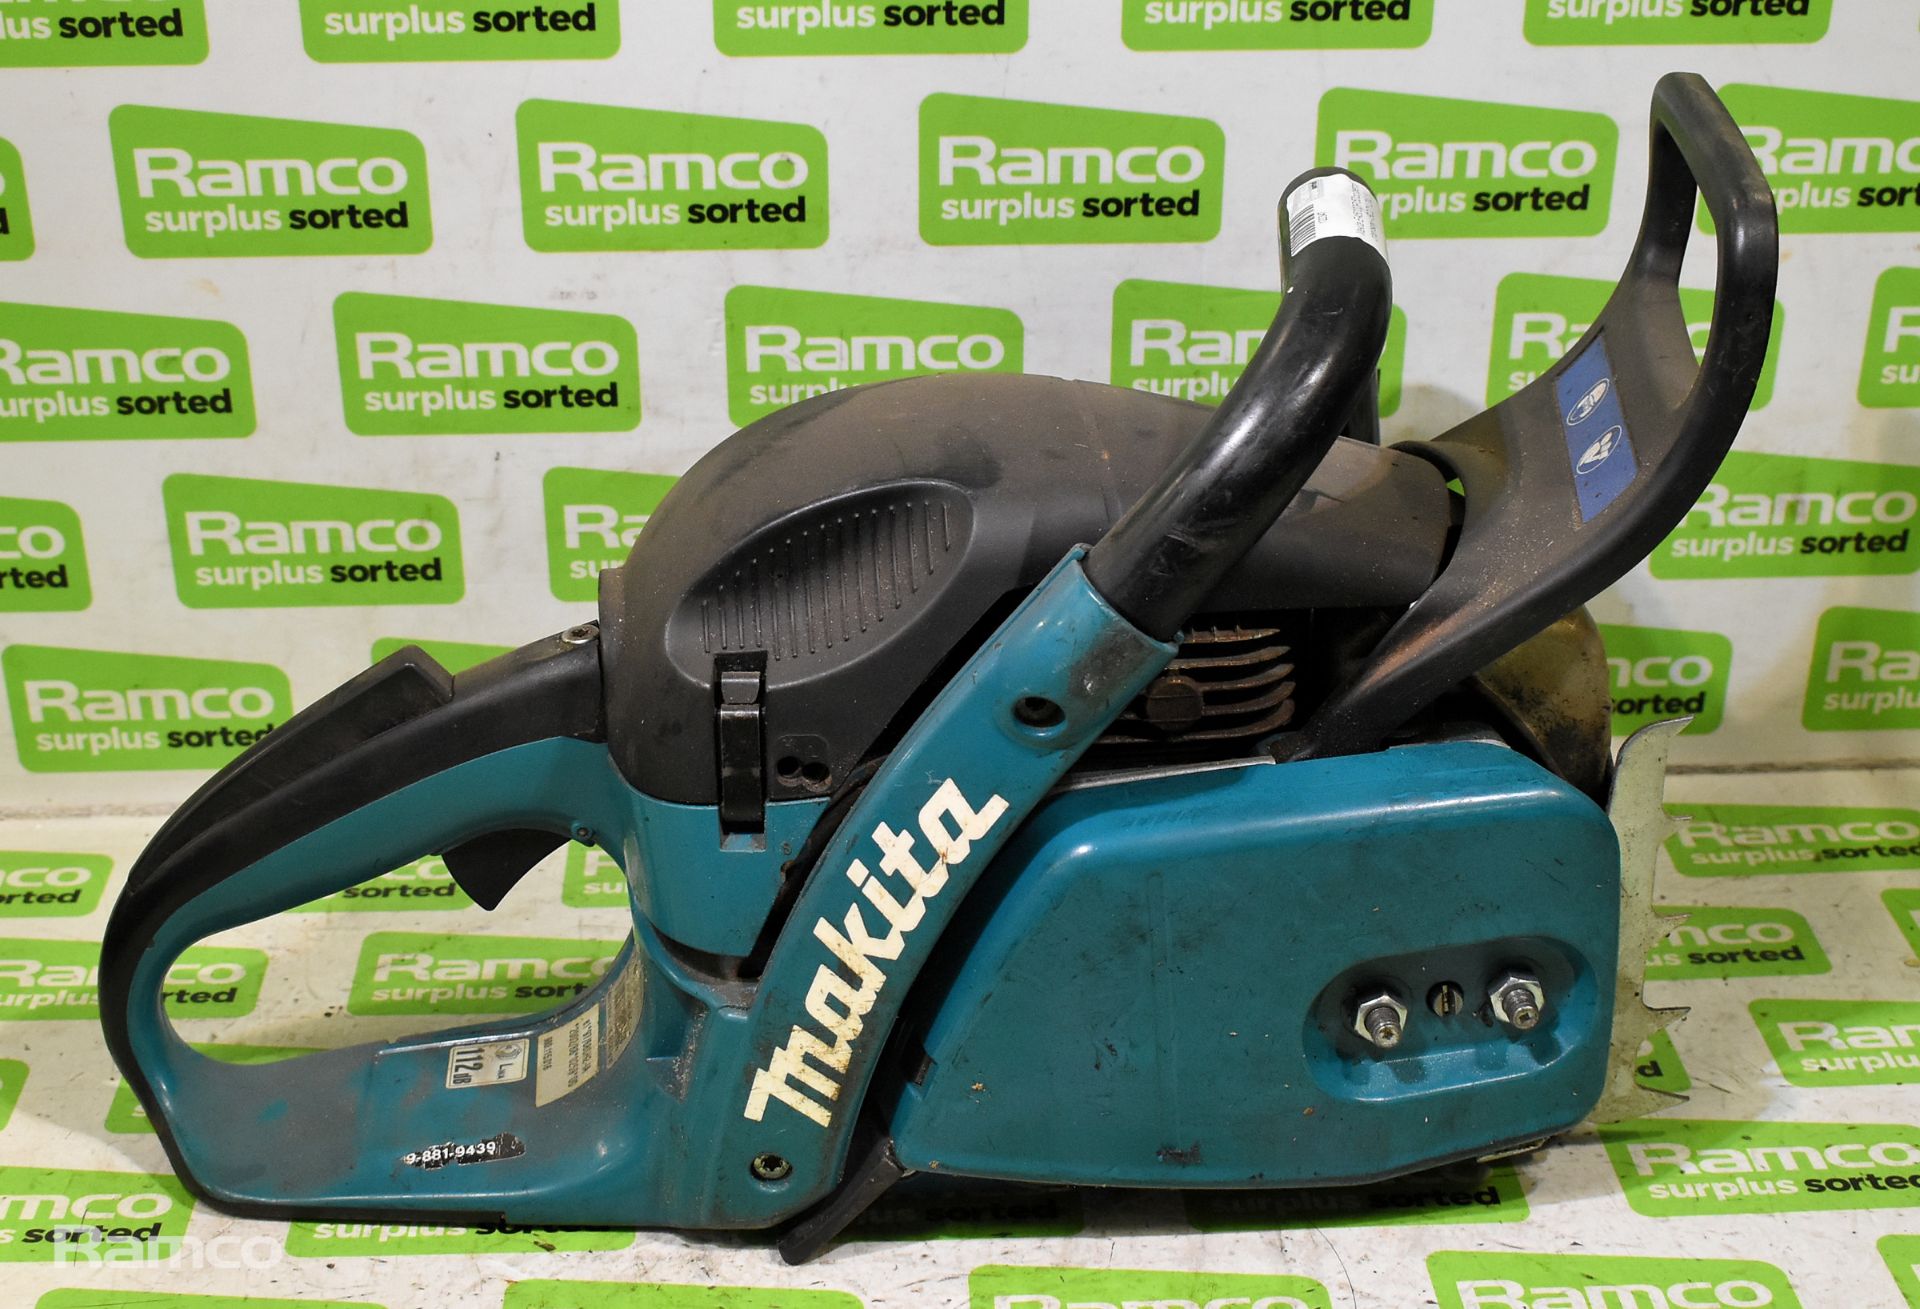 4x Makita DCS5030 50cc petrol chainsaw - BODIES ONLY - AS SPARES AND REPAIRS - Image 13 of 21